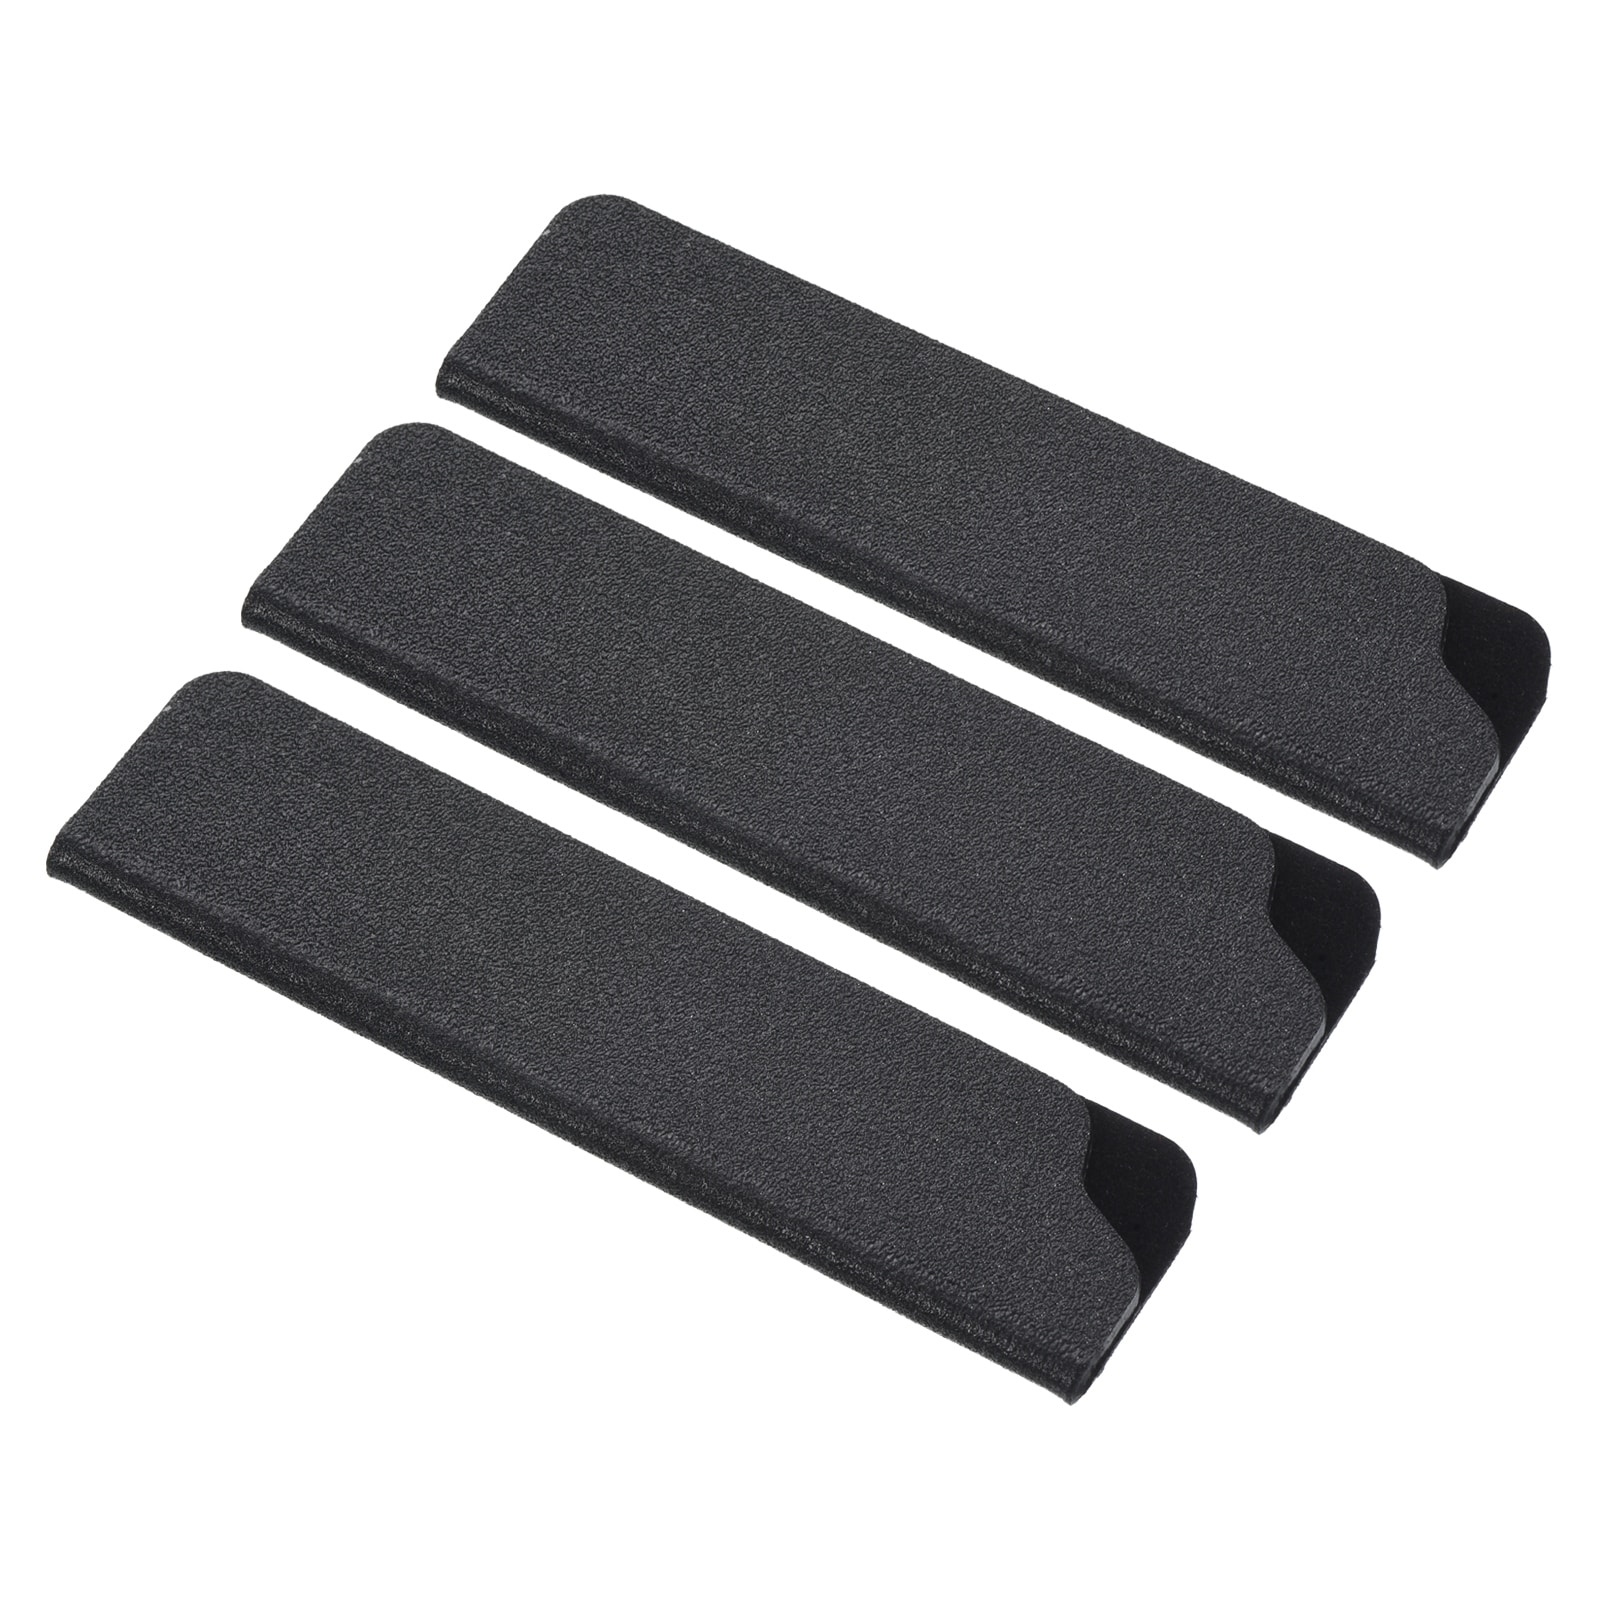 Plastic Kitchen Knife Sheath Cover Sleeves for 3.5 Paring Knife - Black -  On Sale - Bed Bath & Beyond - 37922098